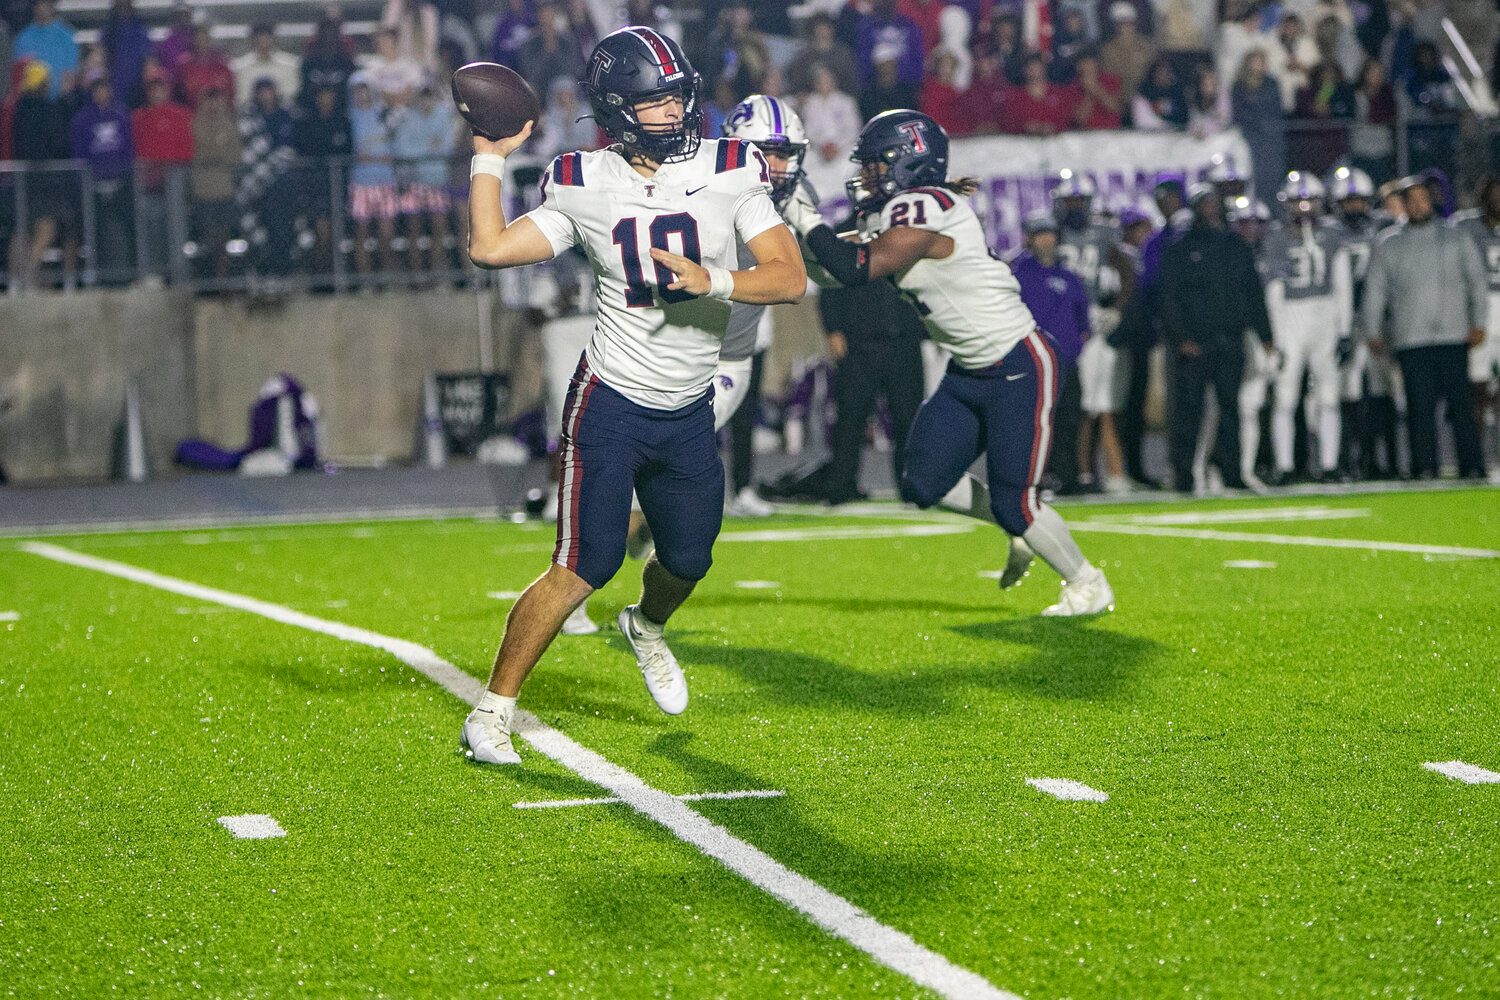 Wyatt Young passes during Friday's game between Tompkins and Ridge Point at Hall Stadium.